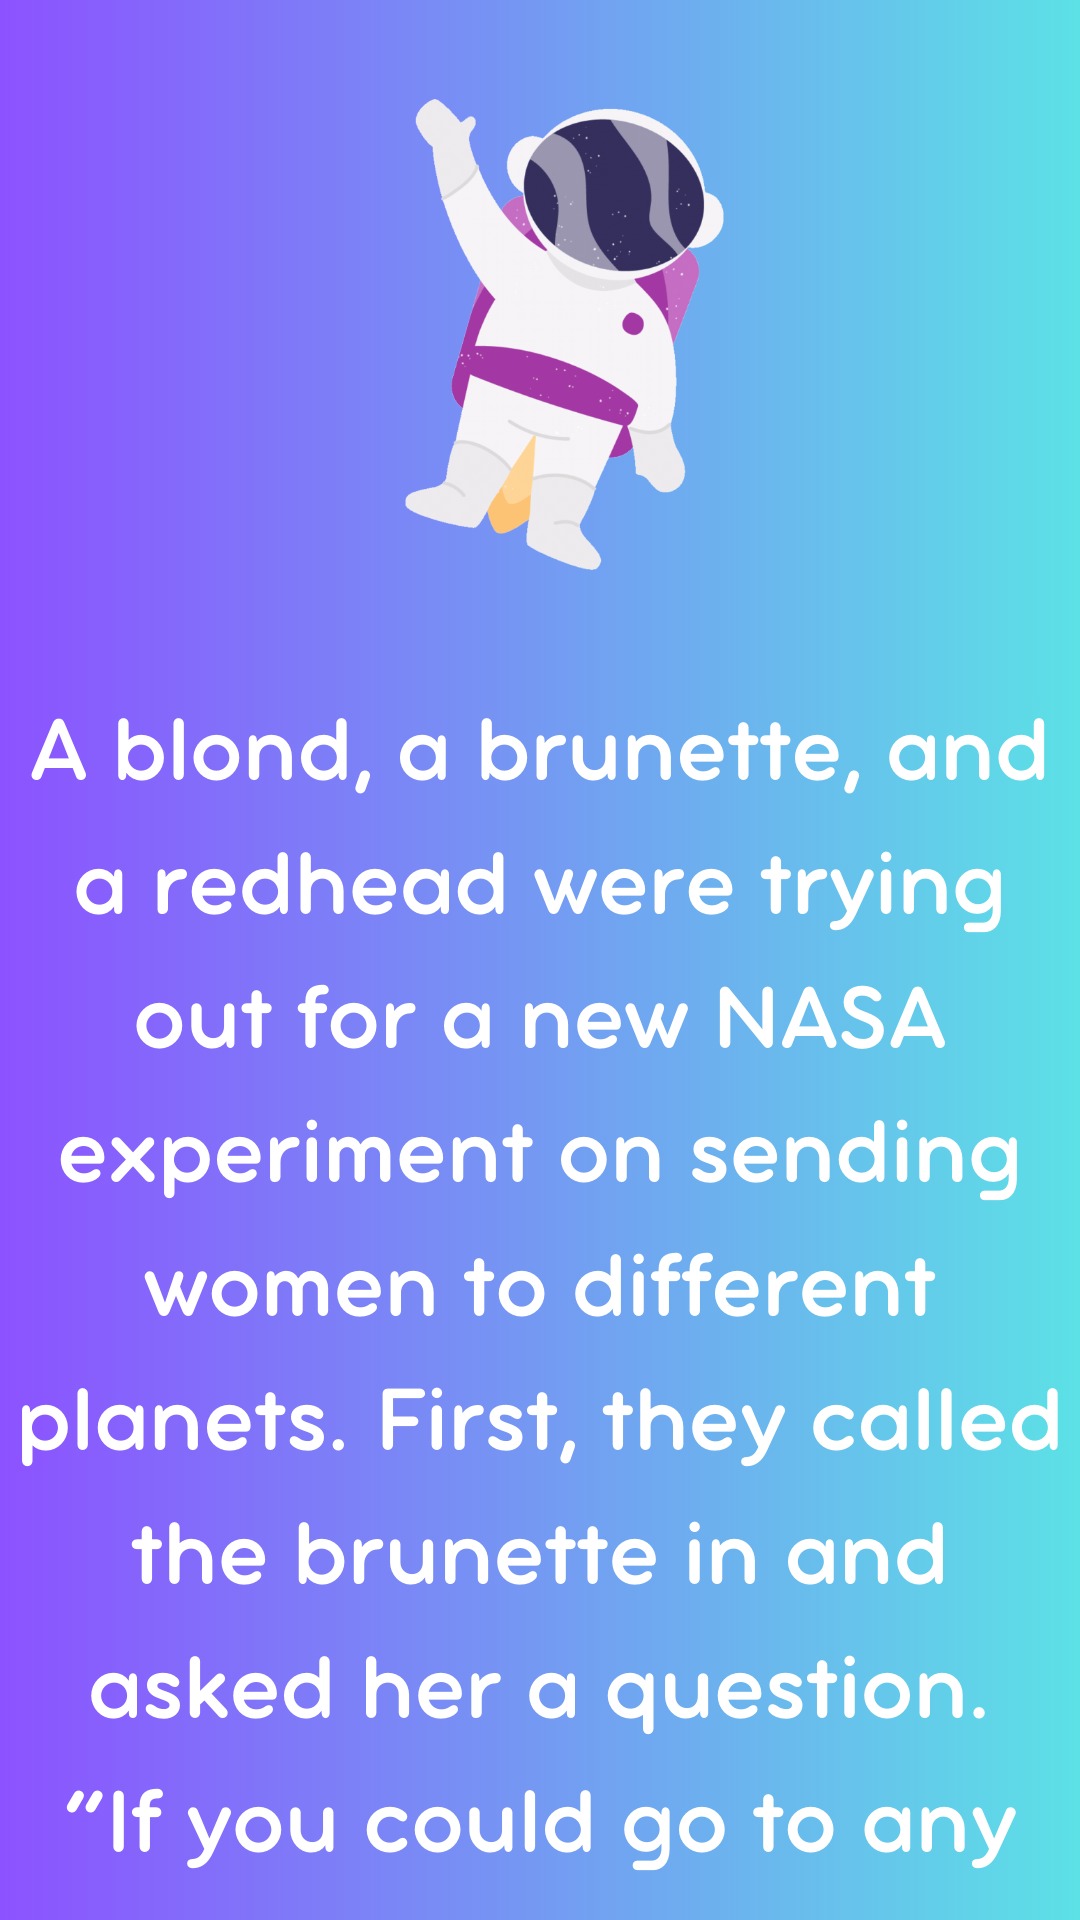 A blond, a brunette, and a redhead were trying out for a new NASA experiment on sending women to different planets